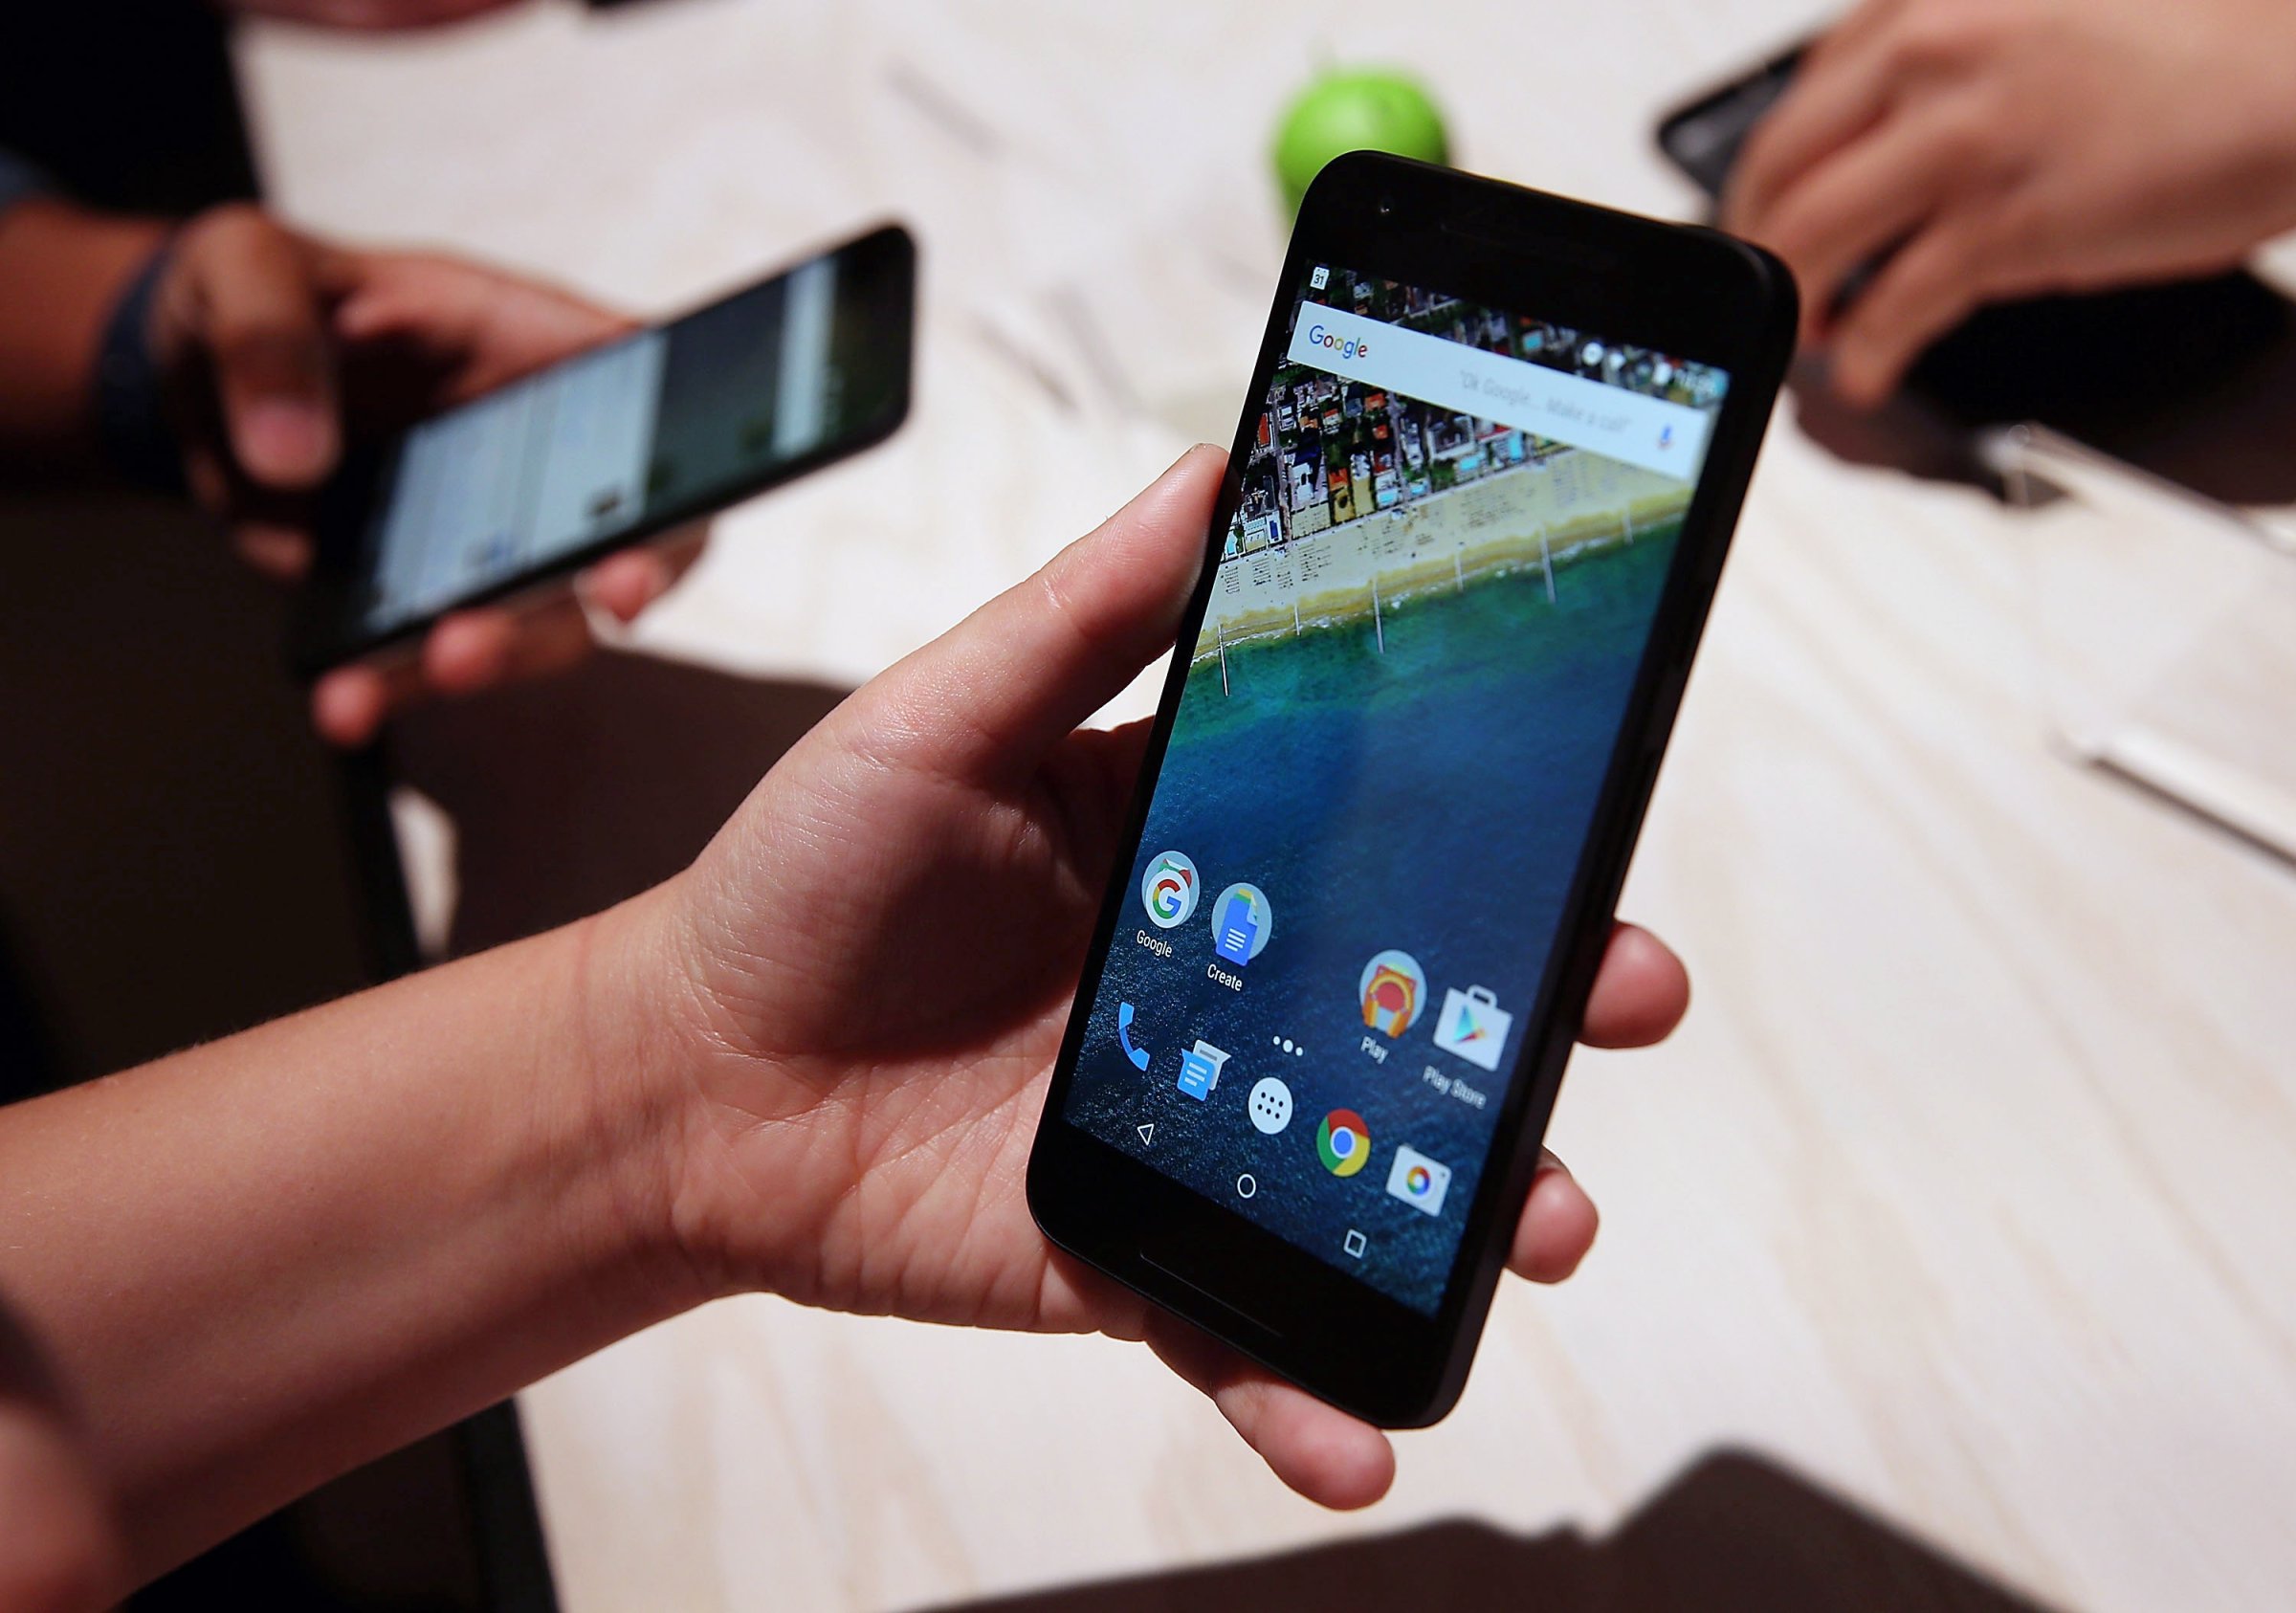 SAN FRANCISCO, CA - SEPTEMBER 29:  An attendee inspects the new Nexus 5X phone during a Google media event on September 29, 2015 in San Francisco, California. Google unveiled its 2015 smartphone lineup, the Nexus 5x and Nexus 6P, the new Chromecast and new Android 6.0 Marshmallow software features.  (Photo by Justin Sullivan/Getty Images)